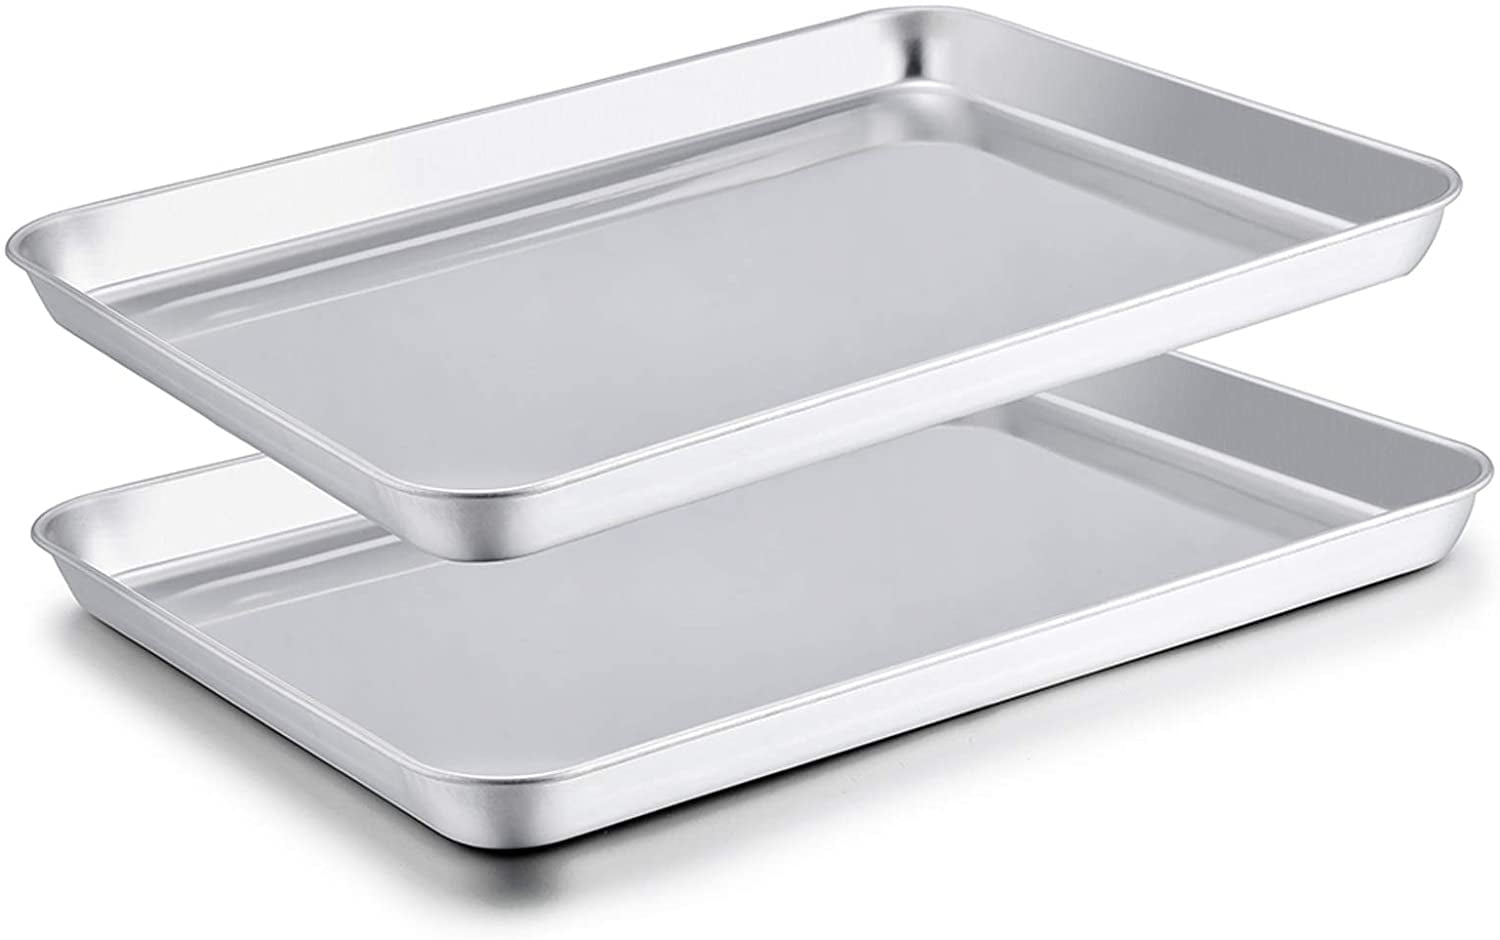 Bastwe 16 inch Cookie Sheets 6 Baking Sheets Set of 2 